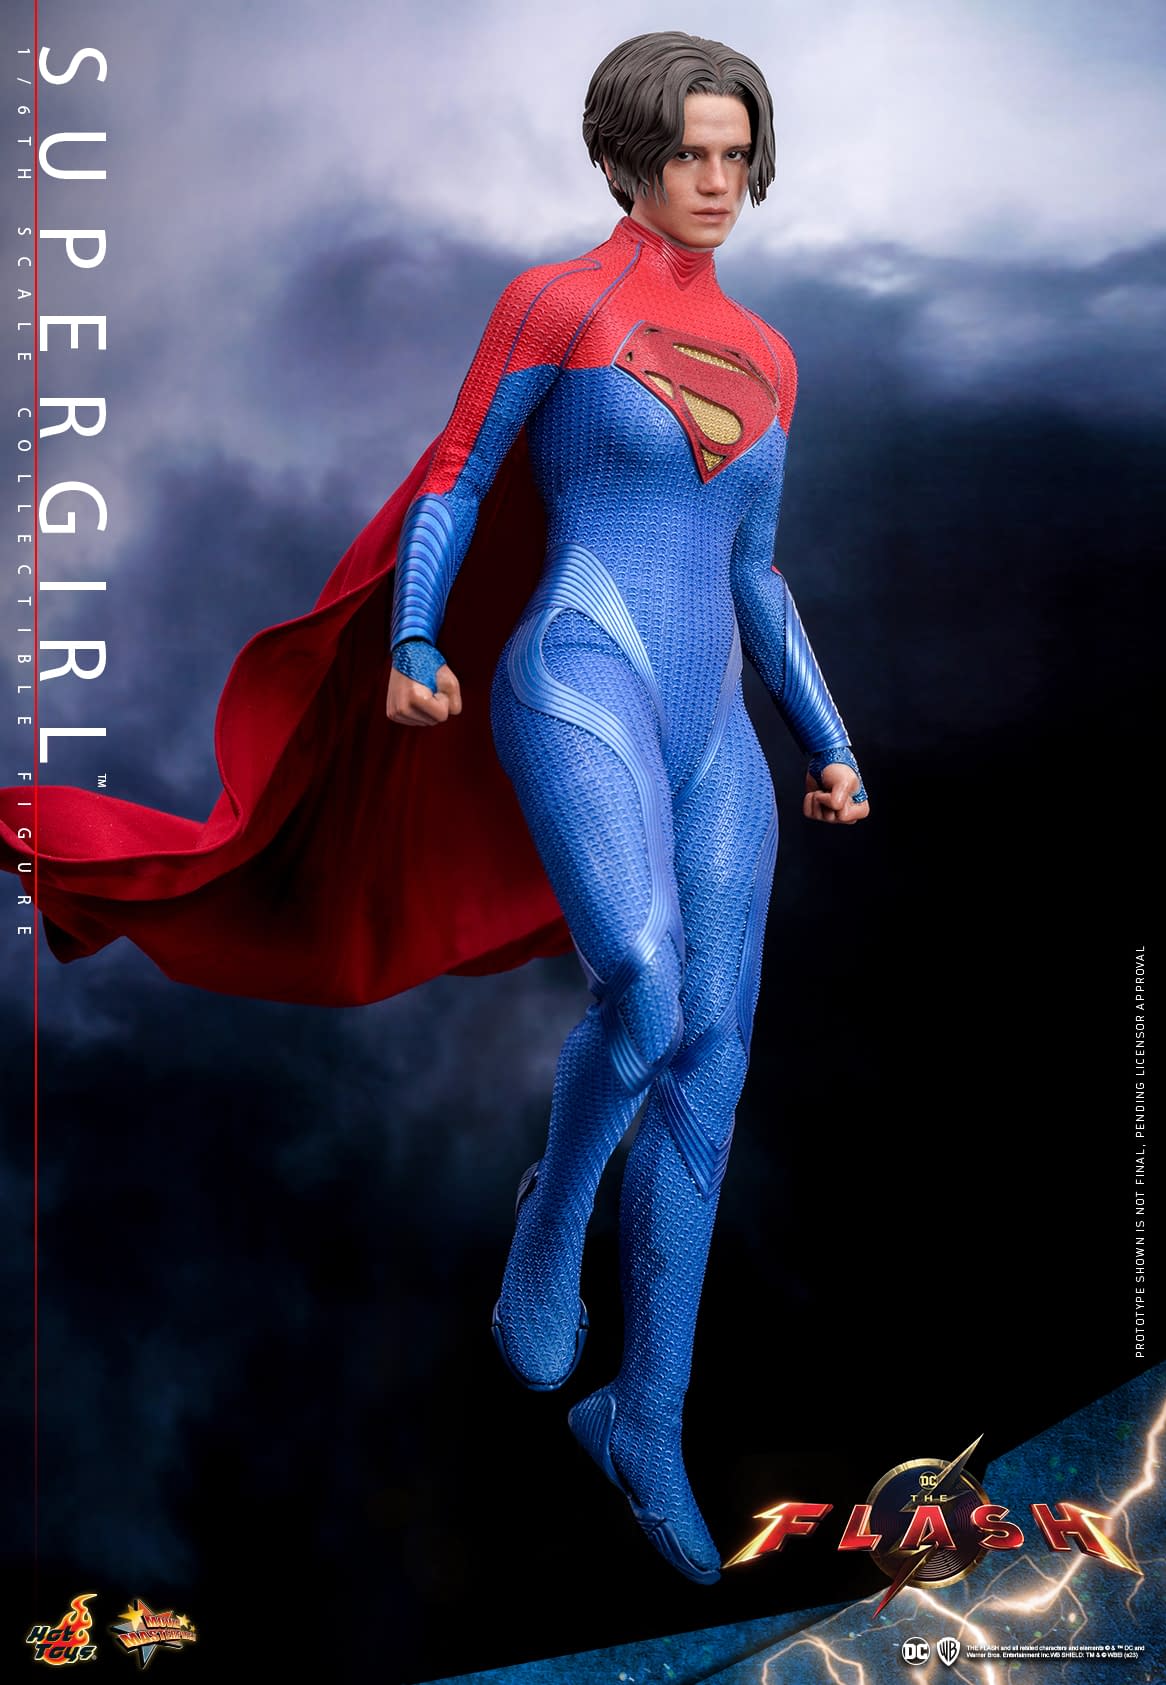 Supergirl Lands At Hot Toys With New 1/6 Scale Figure For The Flash